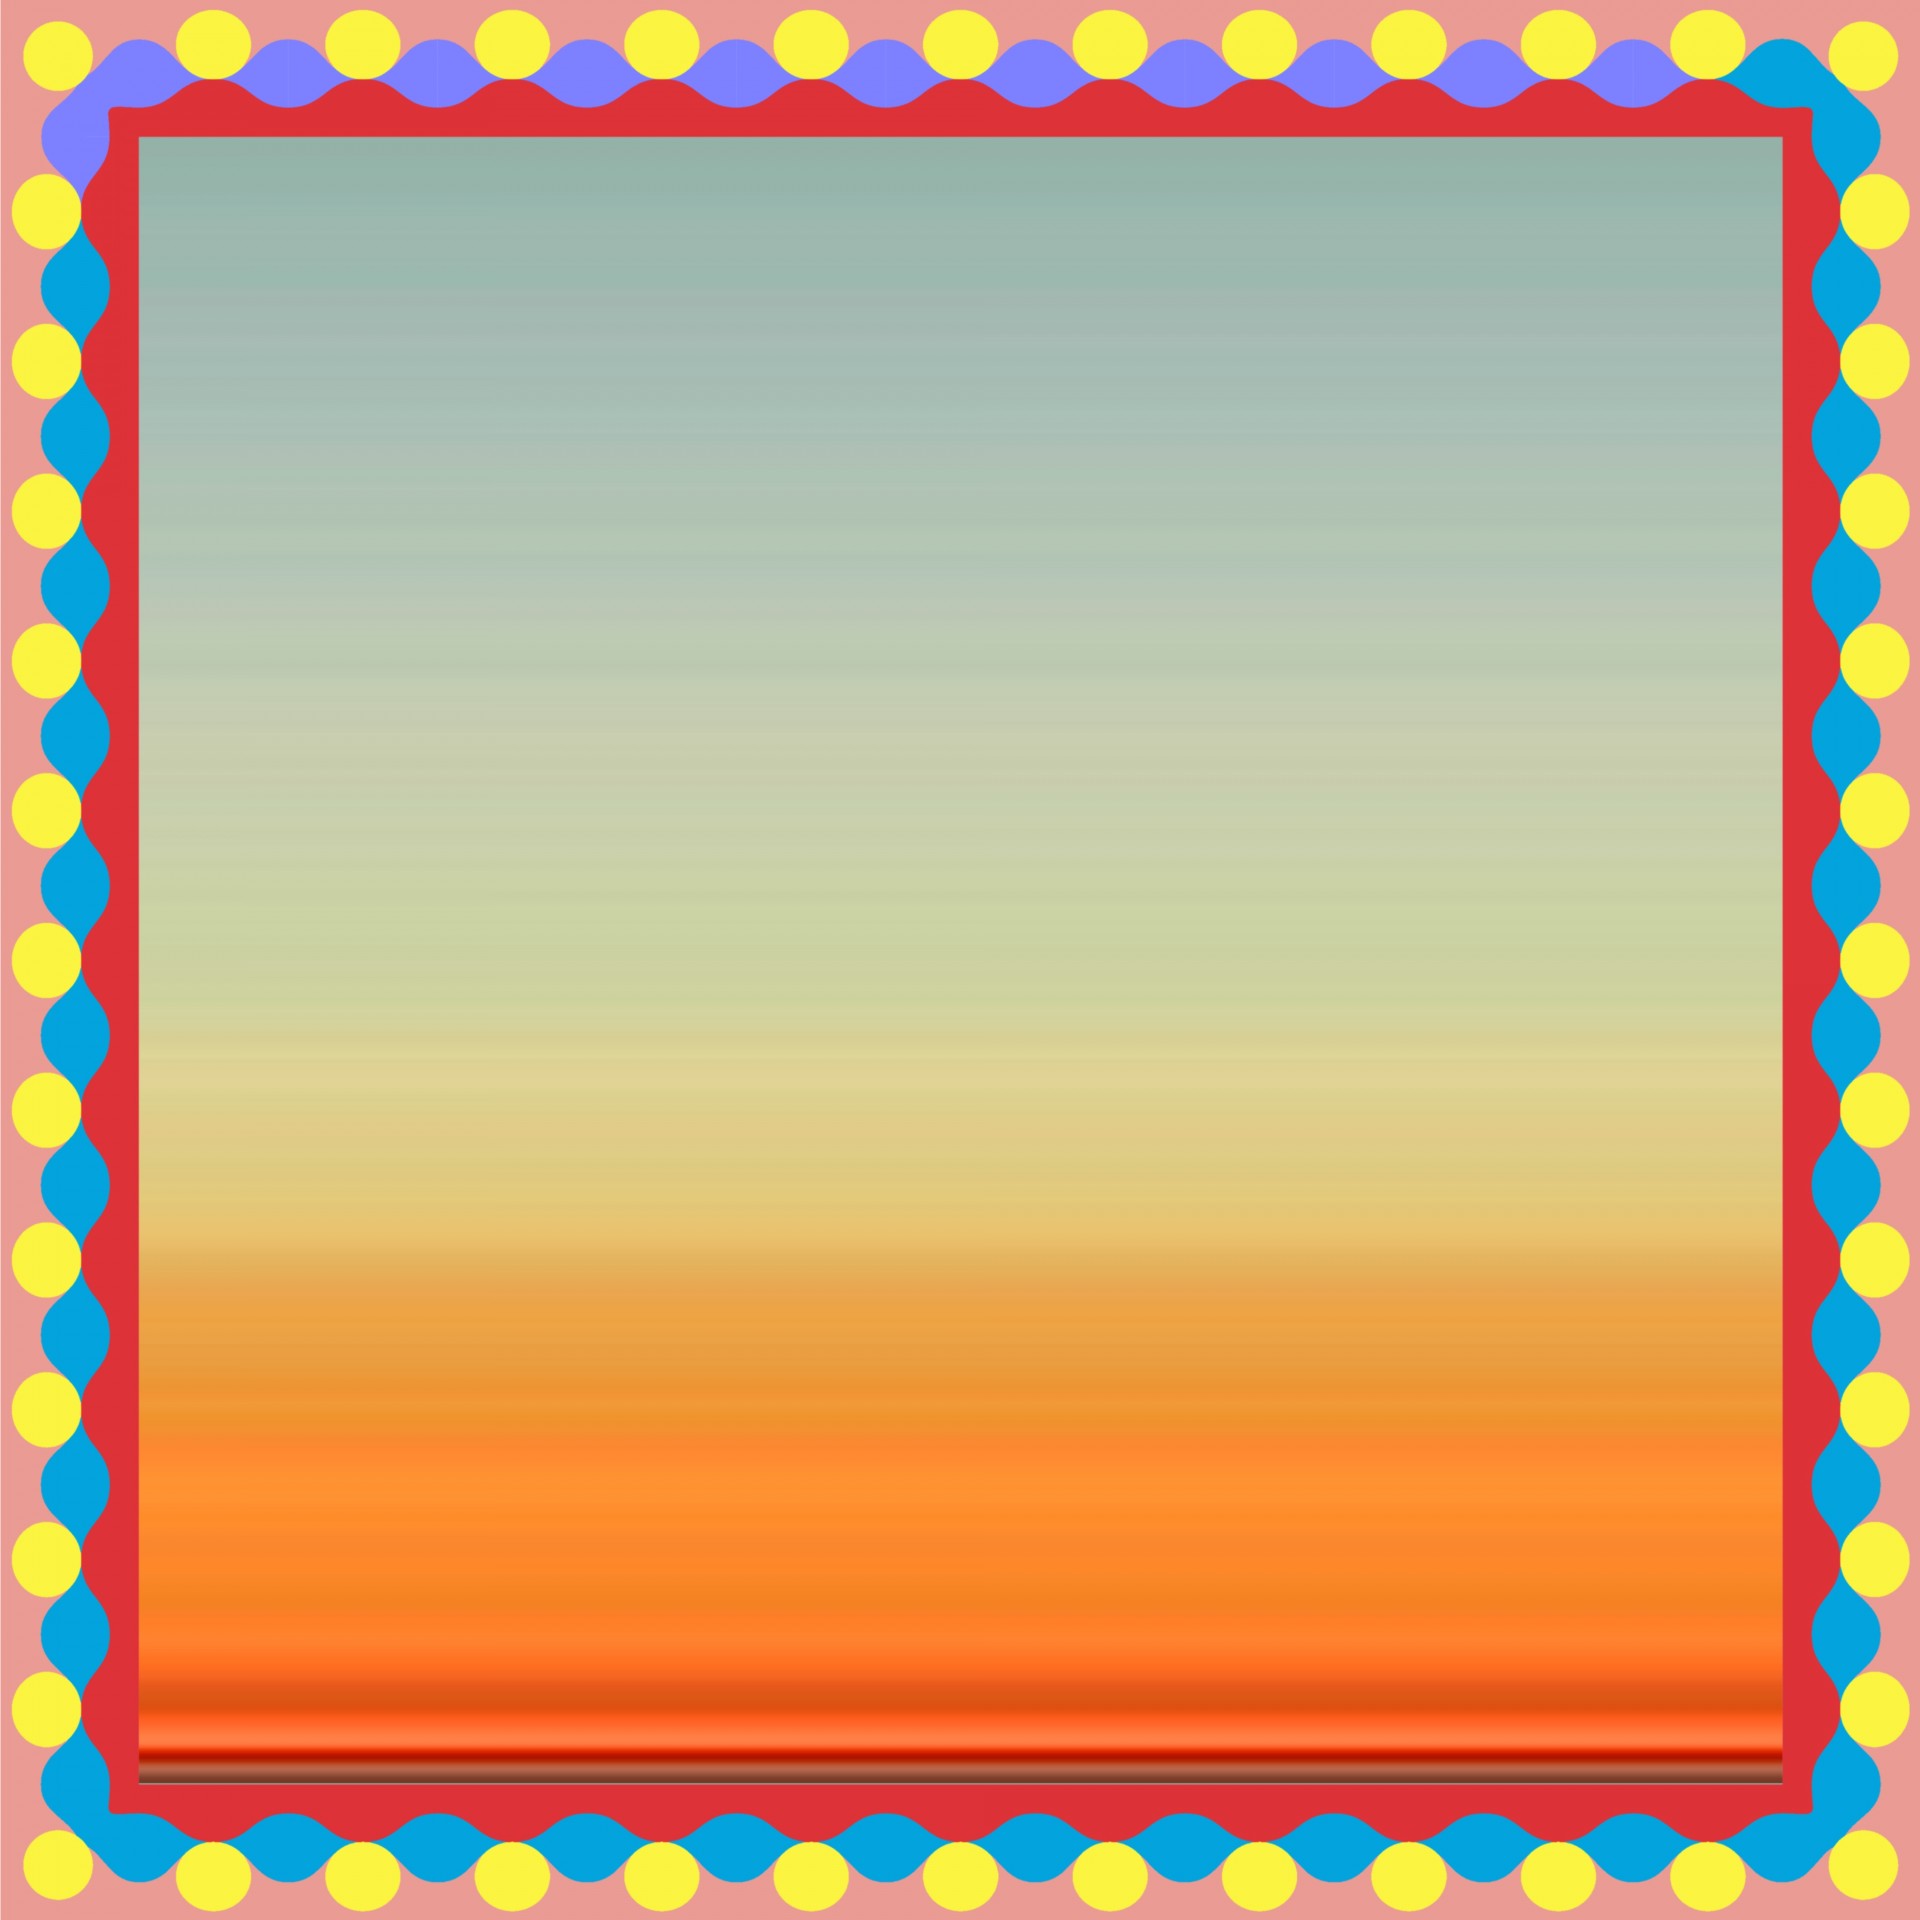 candy frame gradient free photo